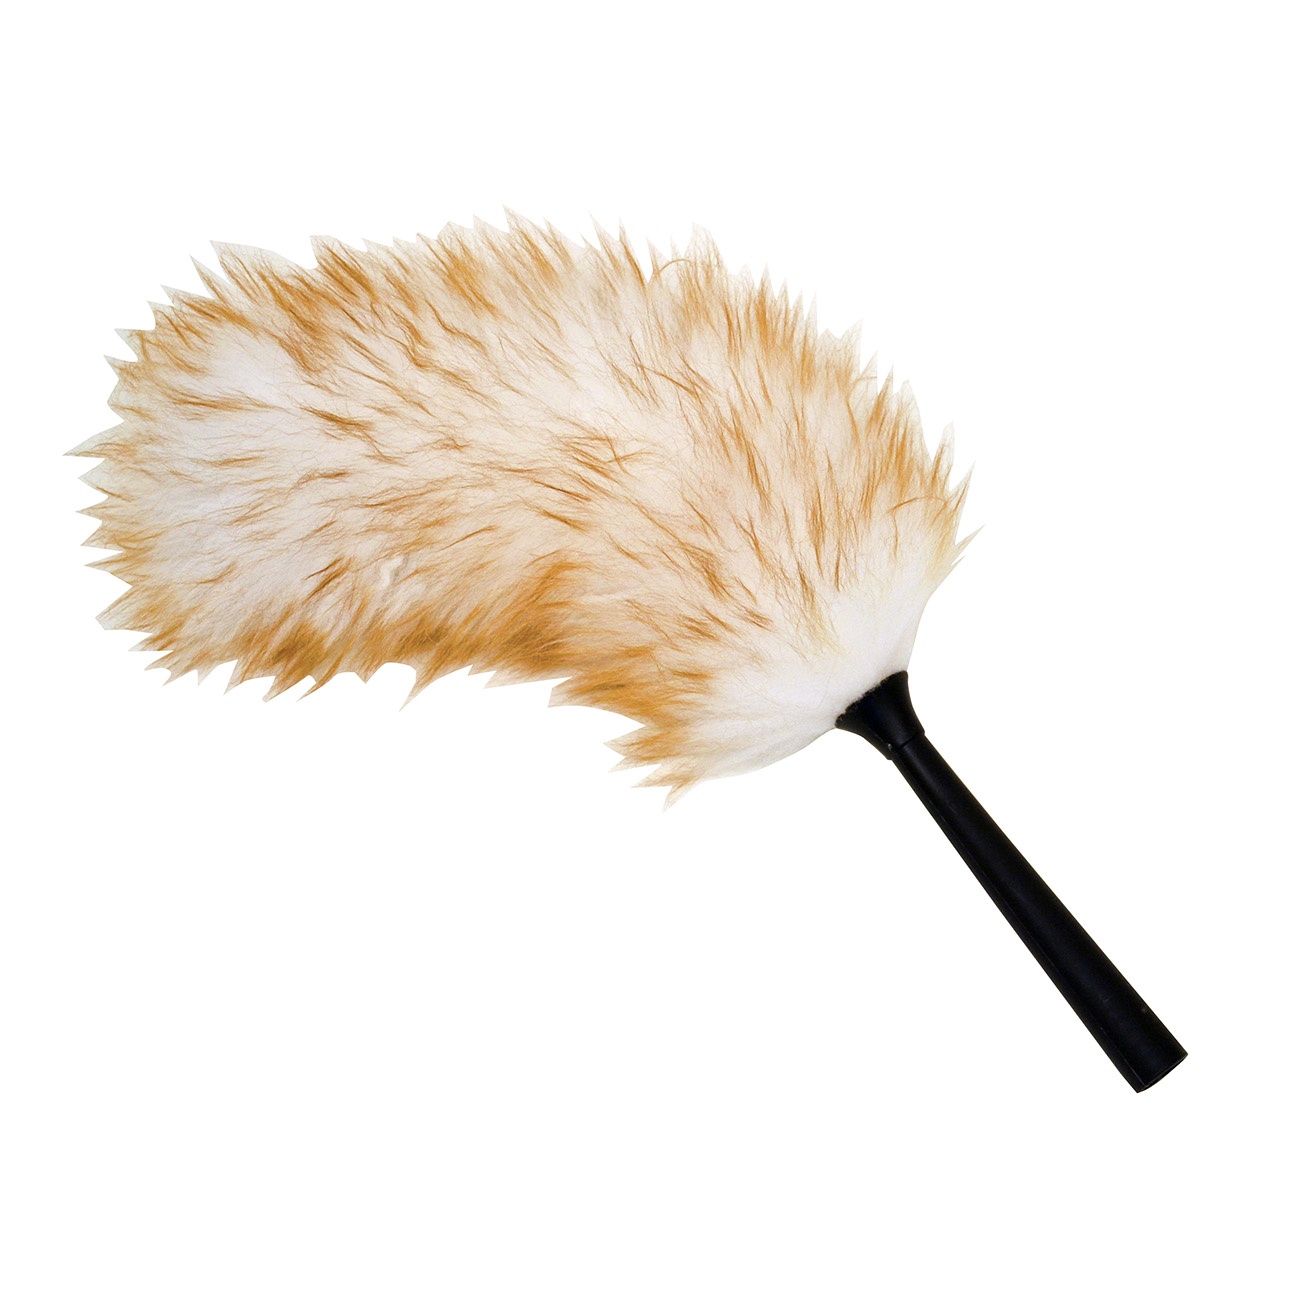 J&A Lambswool Dusters with Solid Wooden Handle, Flexible Head, Anti-Static,  Comfortable Grips 18.9 inchs Long Feather Duster for Office, Home and Car